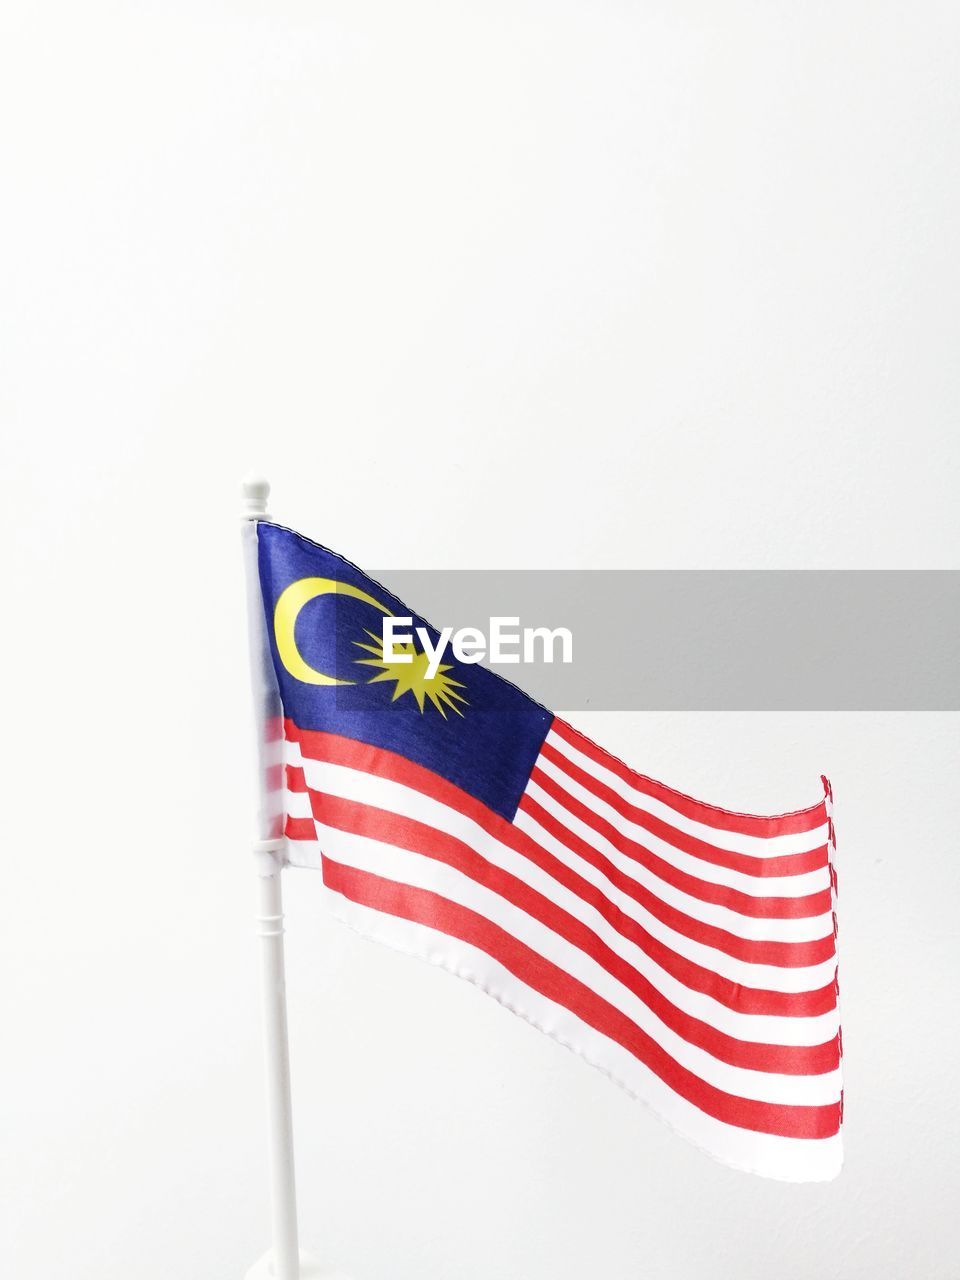 LOW ANGLE VIEW OF FLAG OVER WHITE BACKGROUND